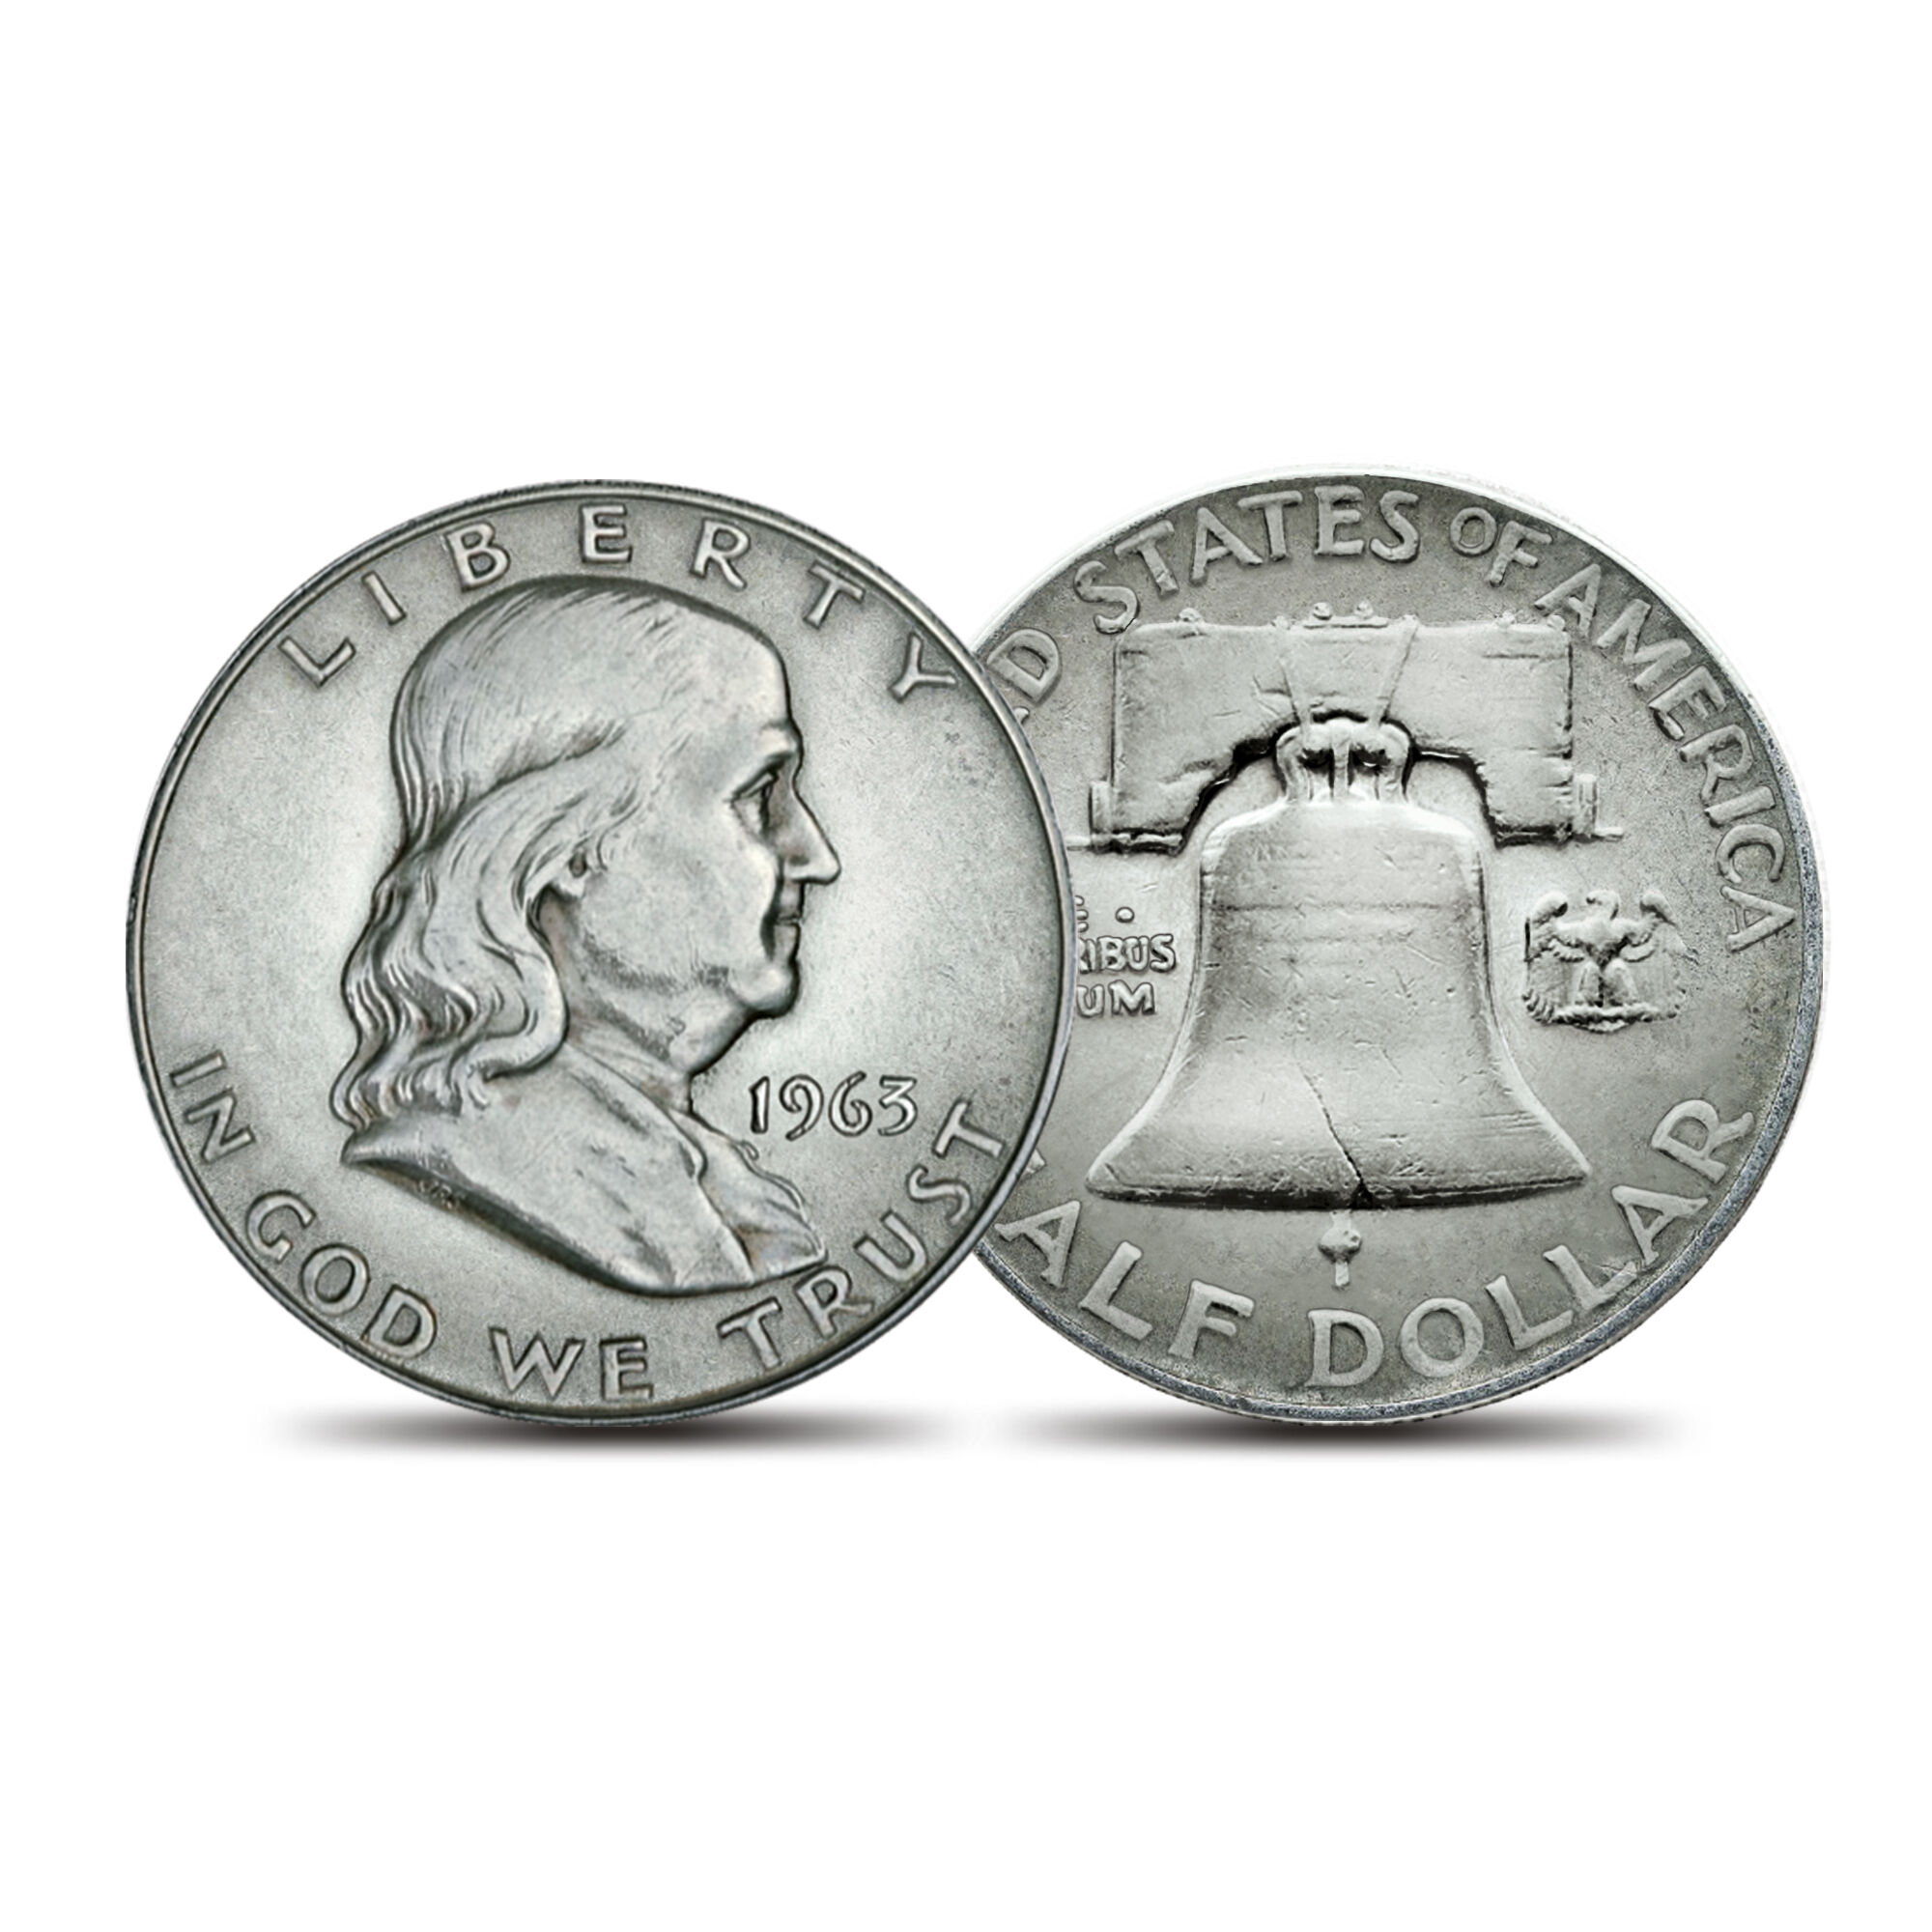 The Last U.S. Silver Half Dollars of the 20th Century 10545 0019 d coin